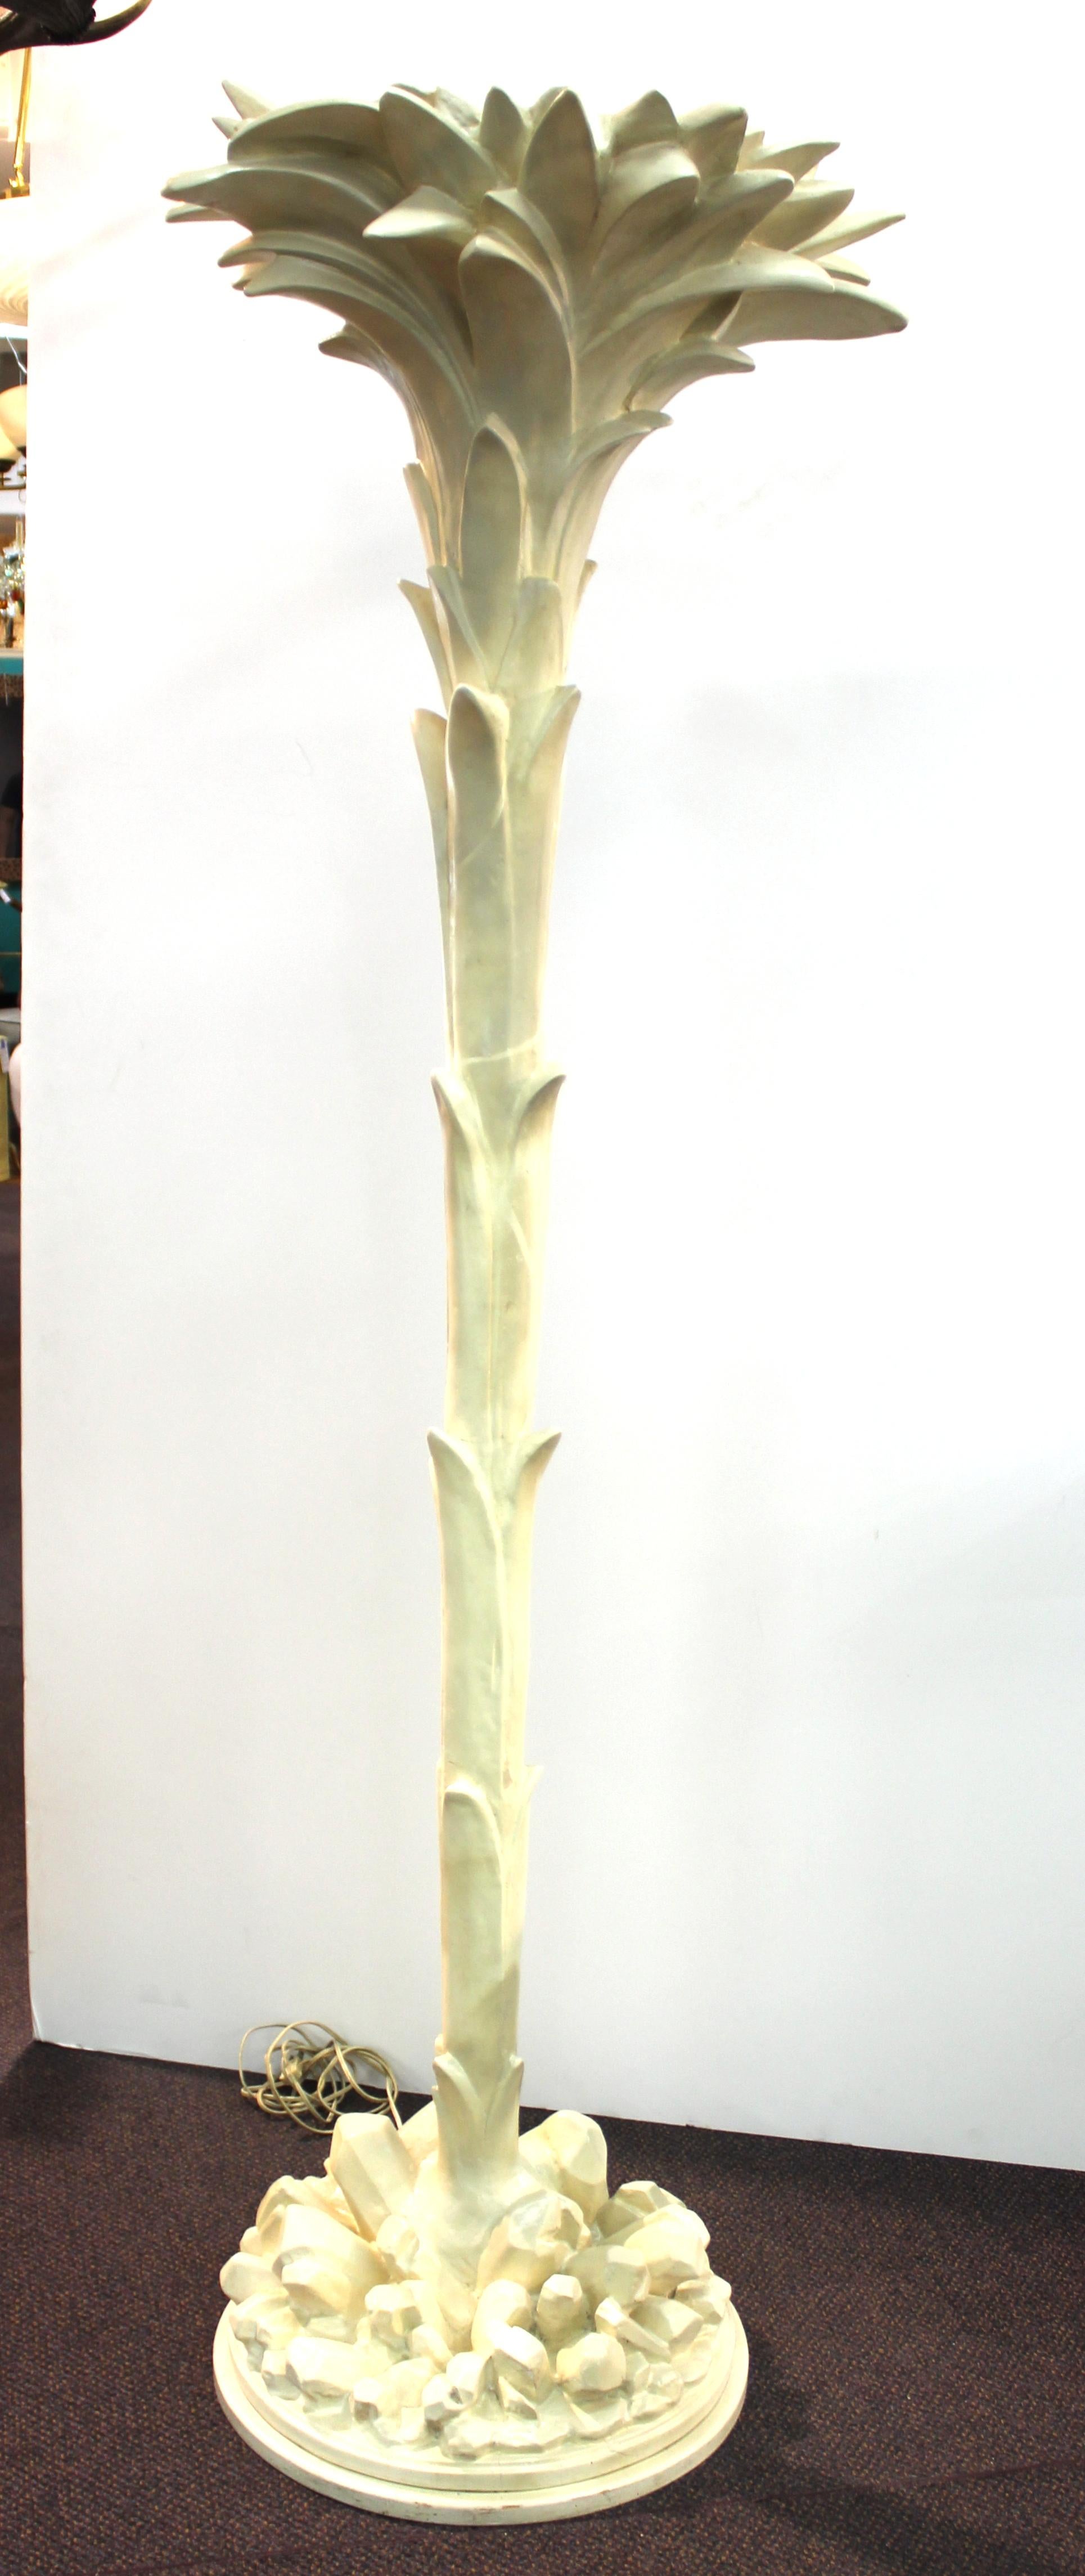 French Baroque Revival style palm tree floor lamp attributed to French designer Serge Roche. The piece is made of lacquered and painted resin and wood. In great vintage condition with age-appropriate wear and use.